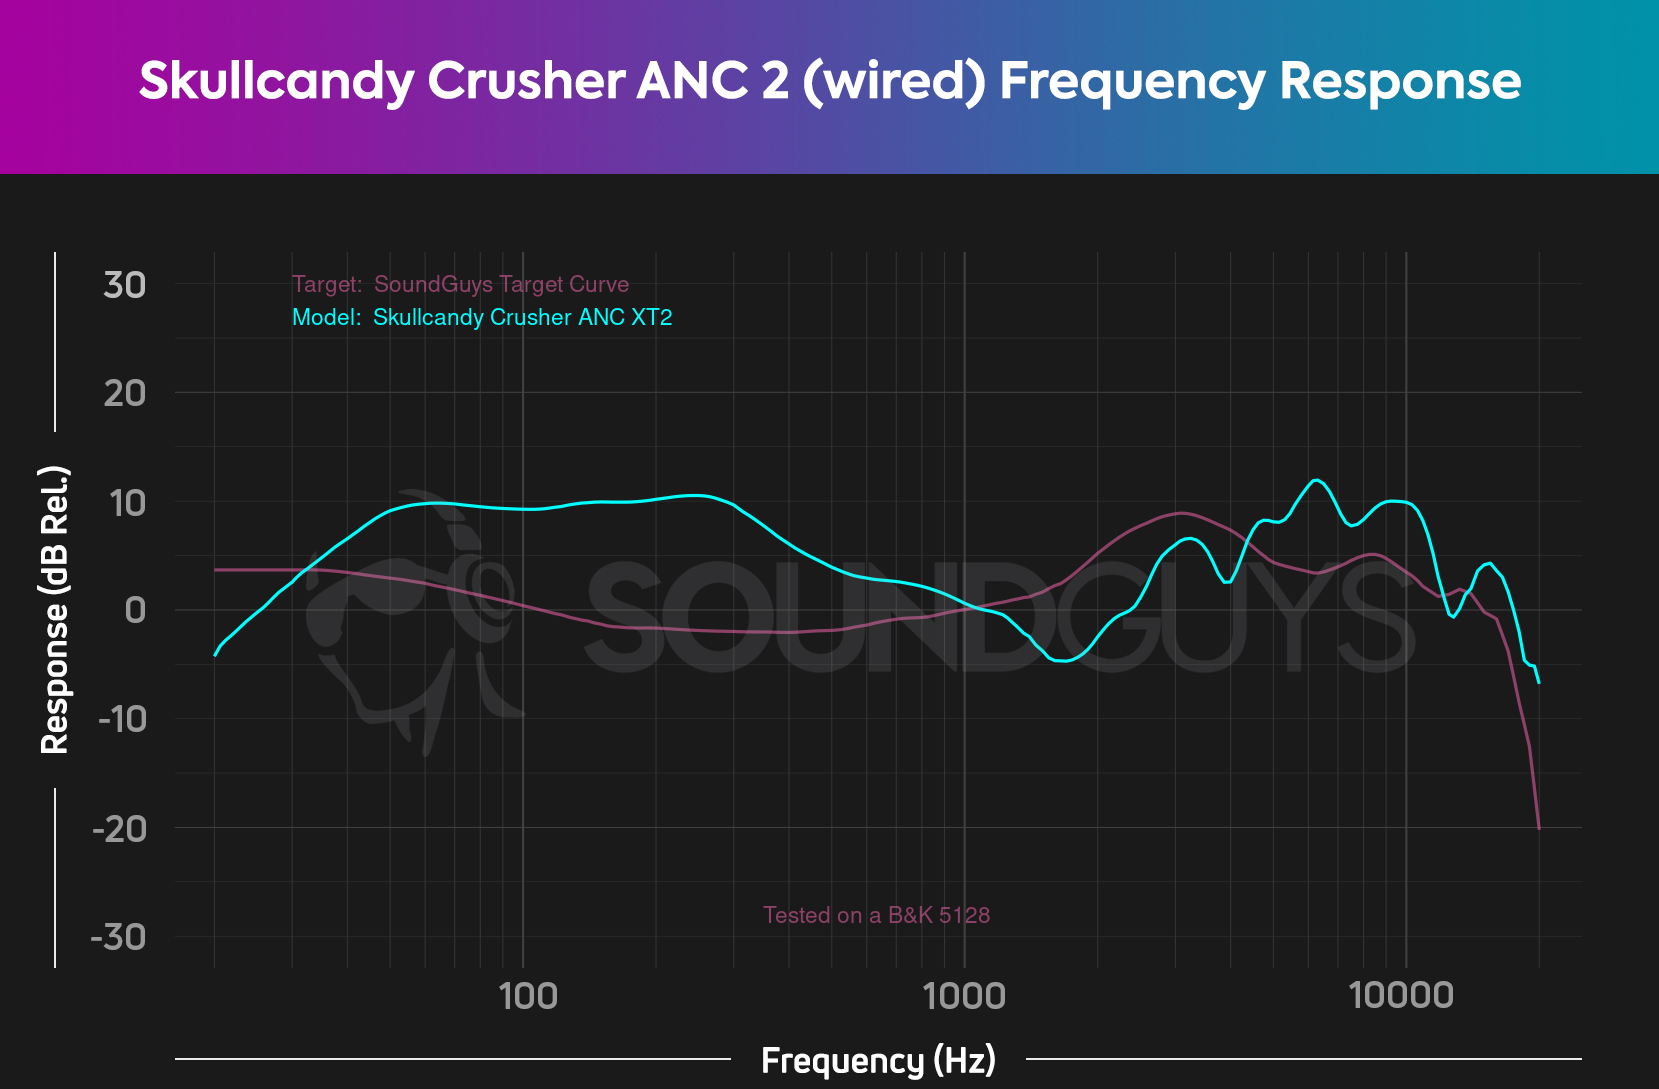 A chart showing the frequency response of the Skullcandy Crusher ANC 2 when using a headphone jack compared to our house chart.